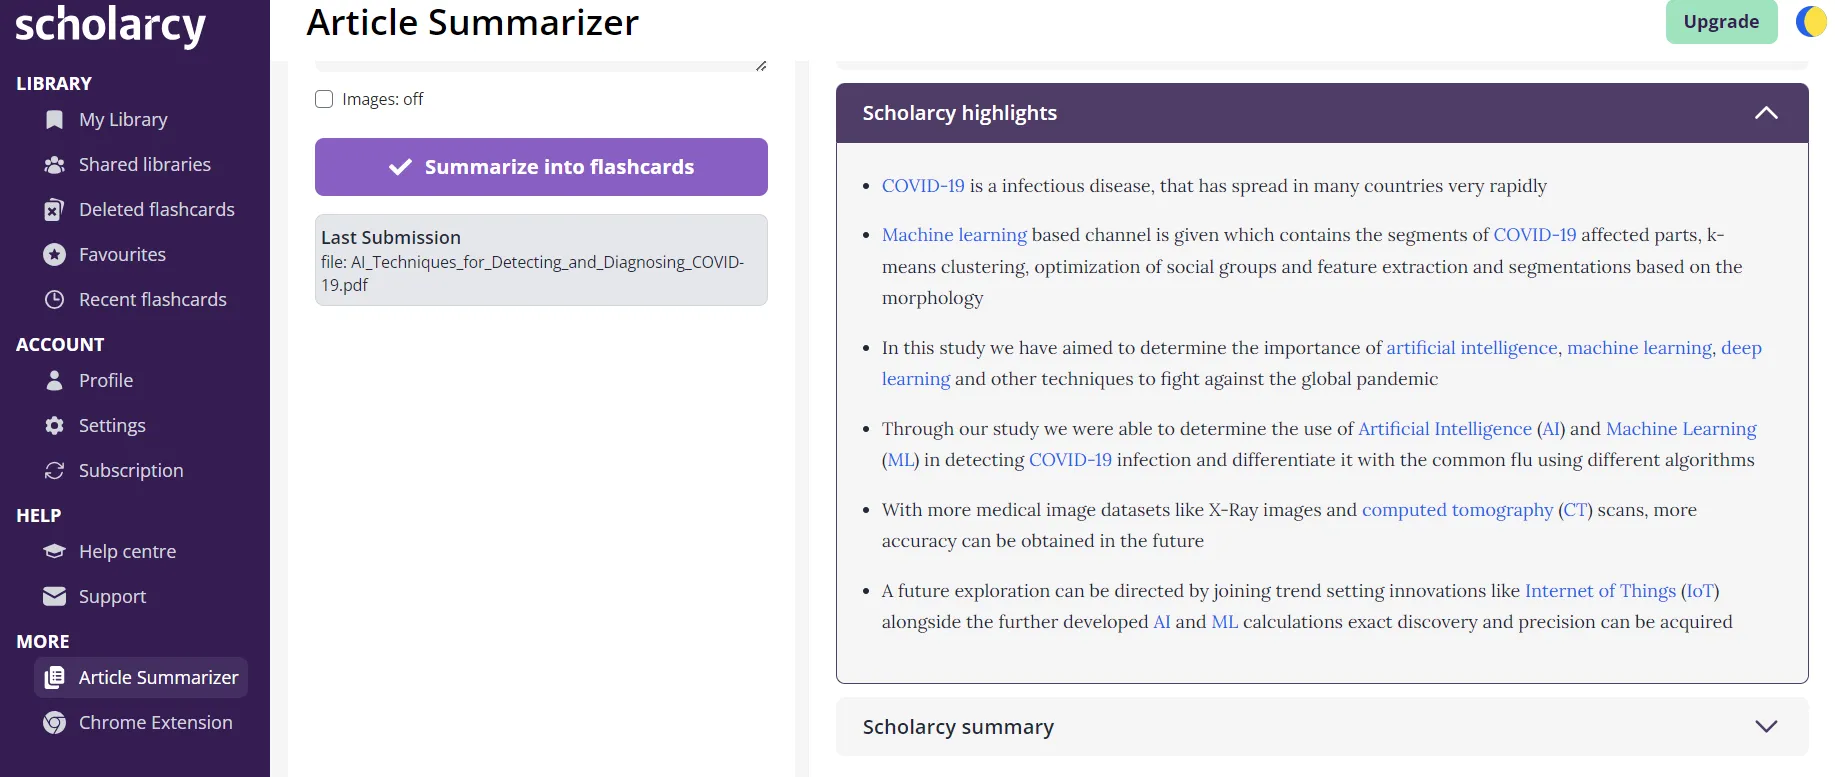 scholarcy research paper summarizer scholarcy highlights